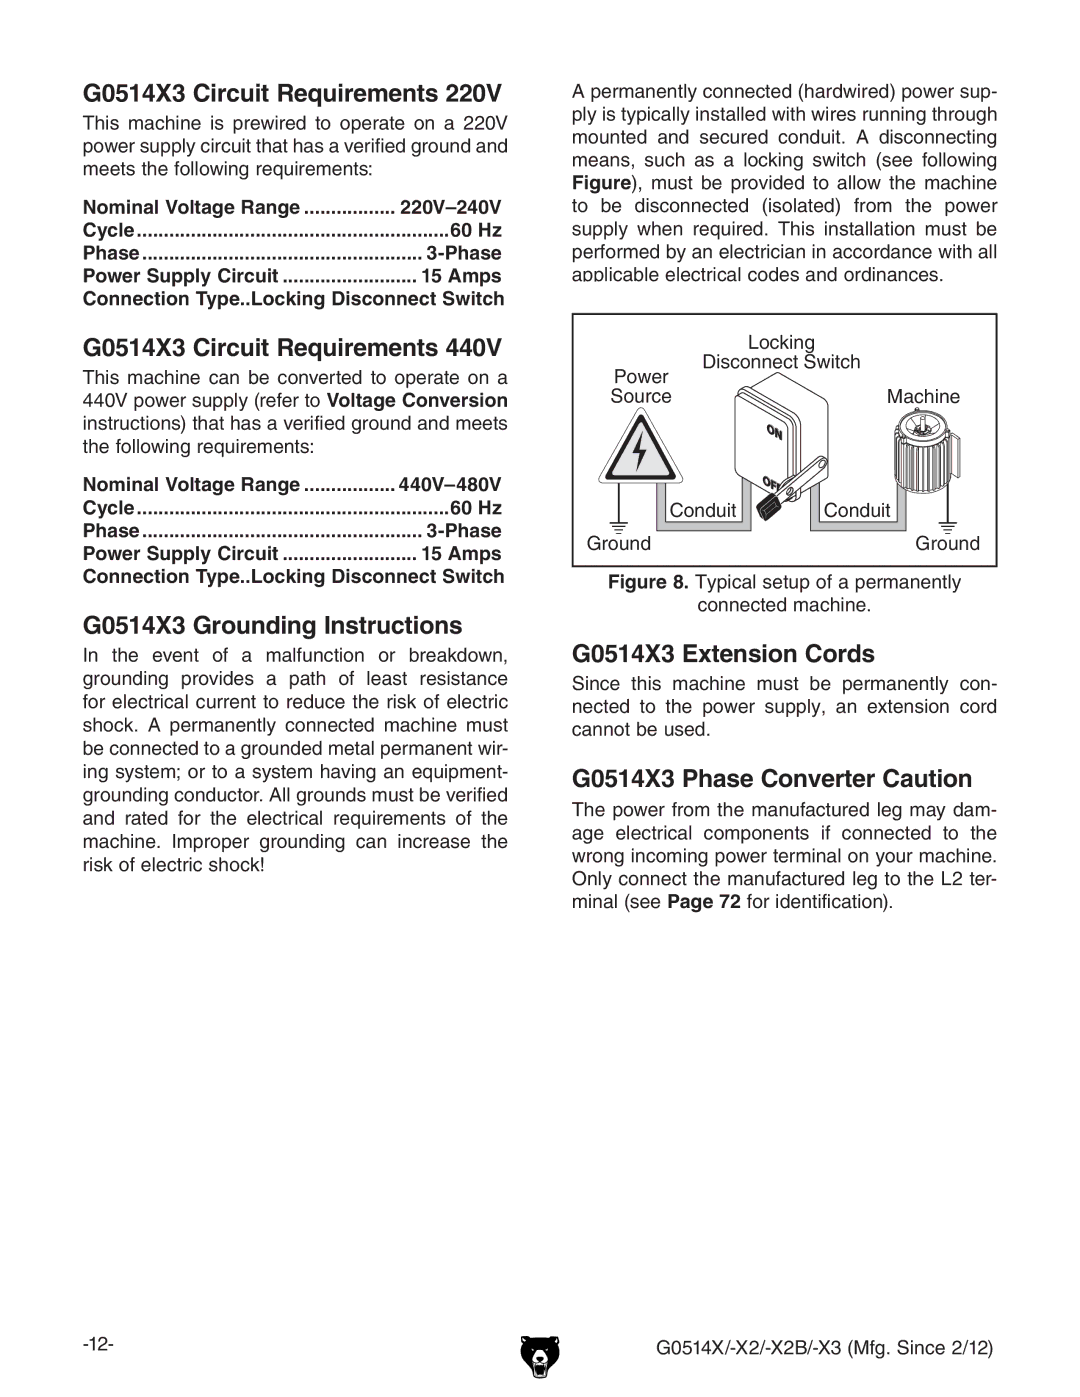 Grizzly owner manual G0514X3 Circuit Requirements, G0514X3 Grounding Instructions, G0514X3 Extension Cords 